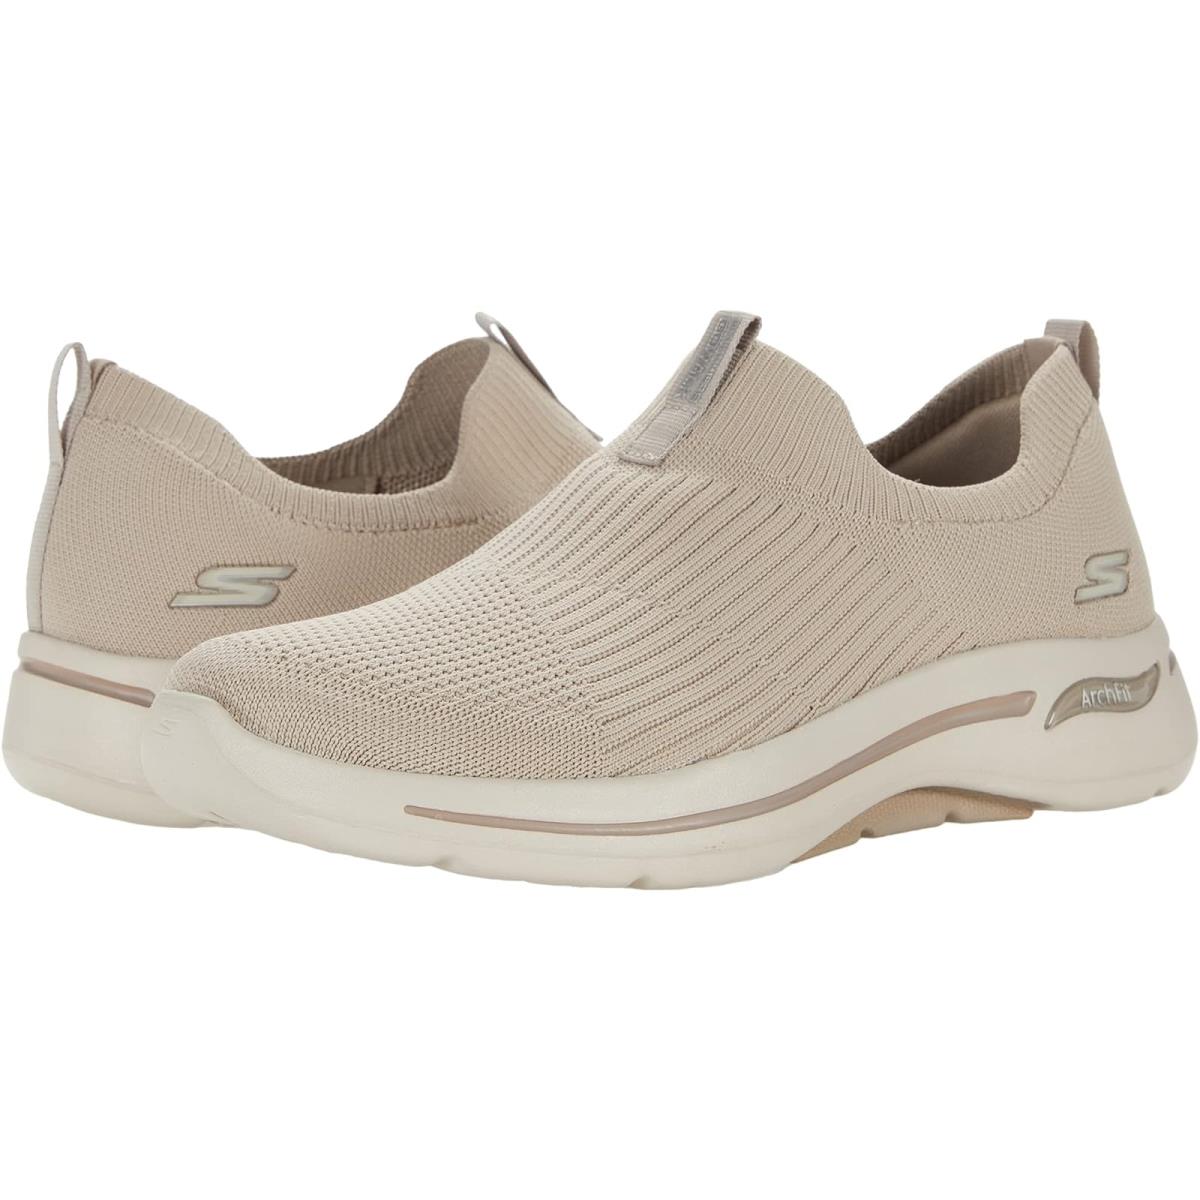 Woman`s Shoes Skechers Performance Go Walk Arch Fit - 124409 Taupe